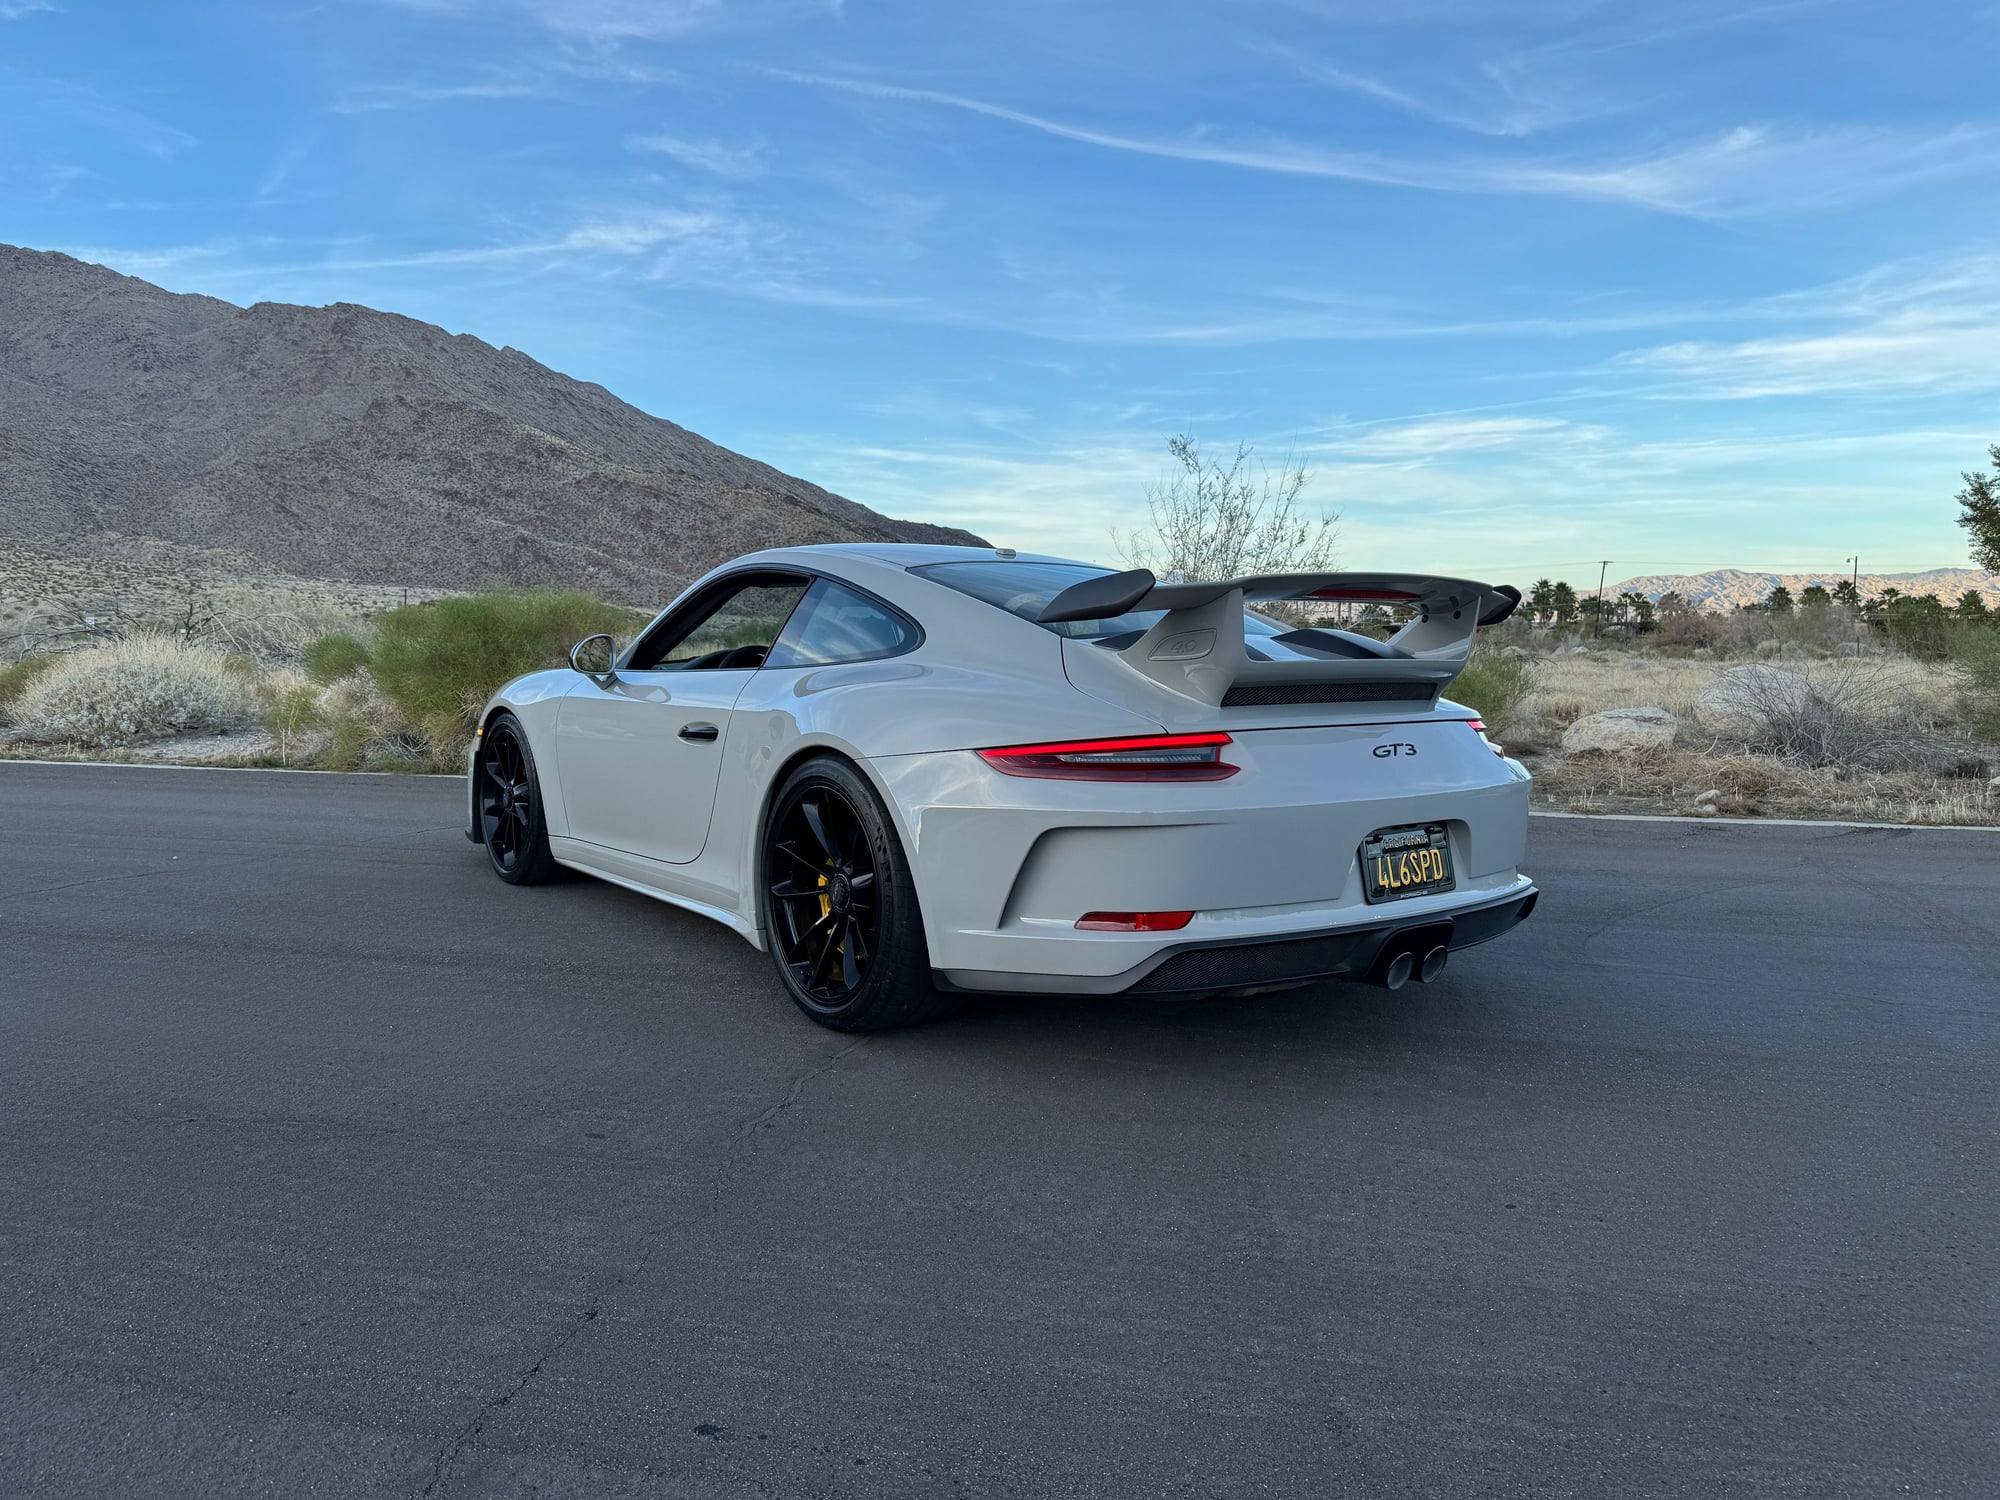 2018 Porsche GT3 - 2018 991.2 GT3 - Chalk on Black, 6 Speed, LWBS, PCCBs, FAL - dream spec! - Used - VIN WP0AC2A90JS175679 - 20,400 Miles - 6 cyl - Manual - Coupe - Gray - Palm Springs, CA 92234, United States